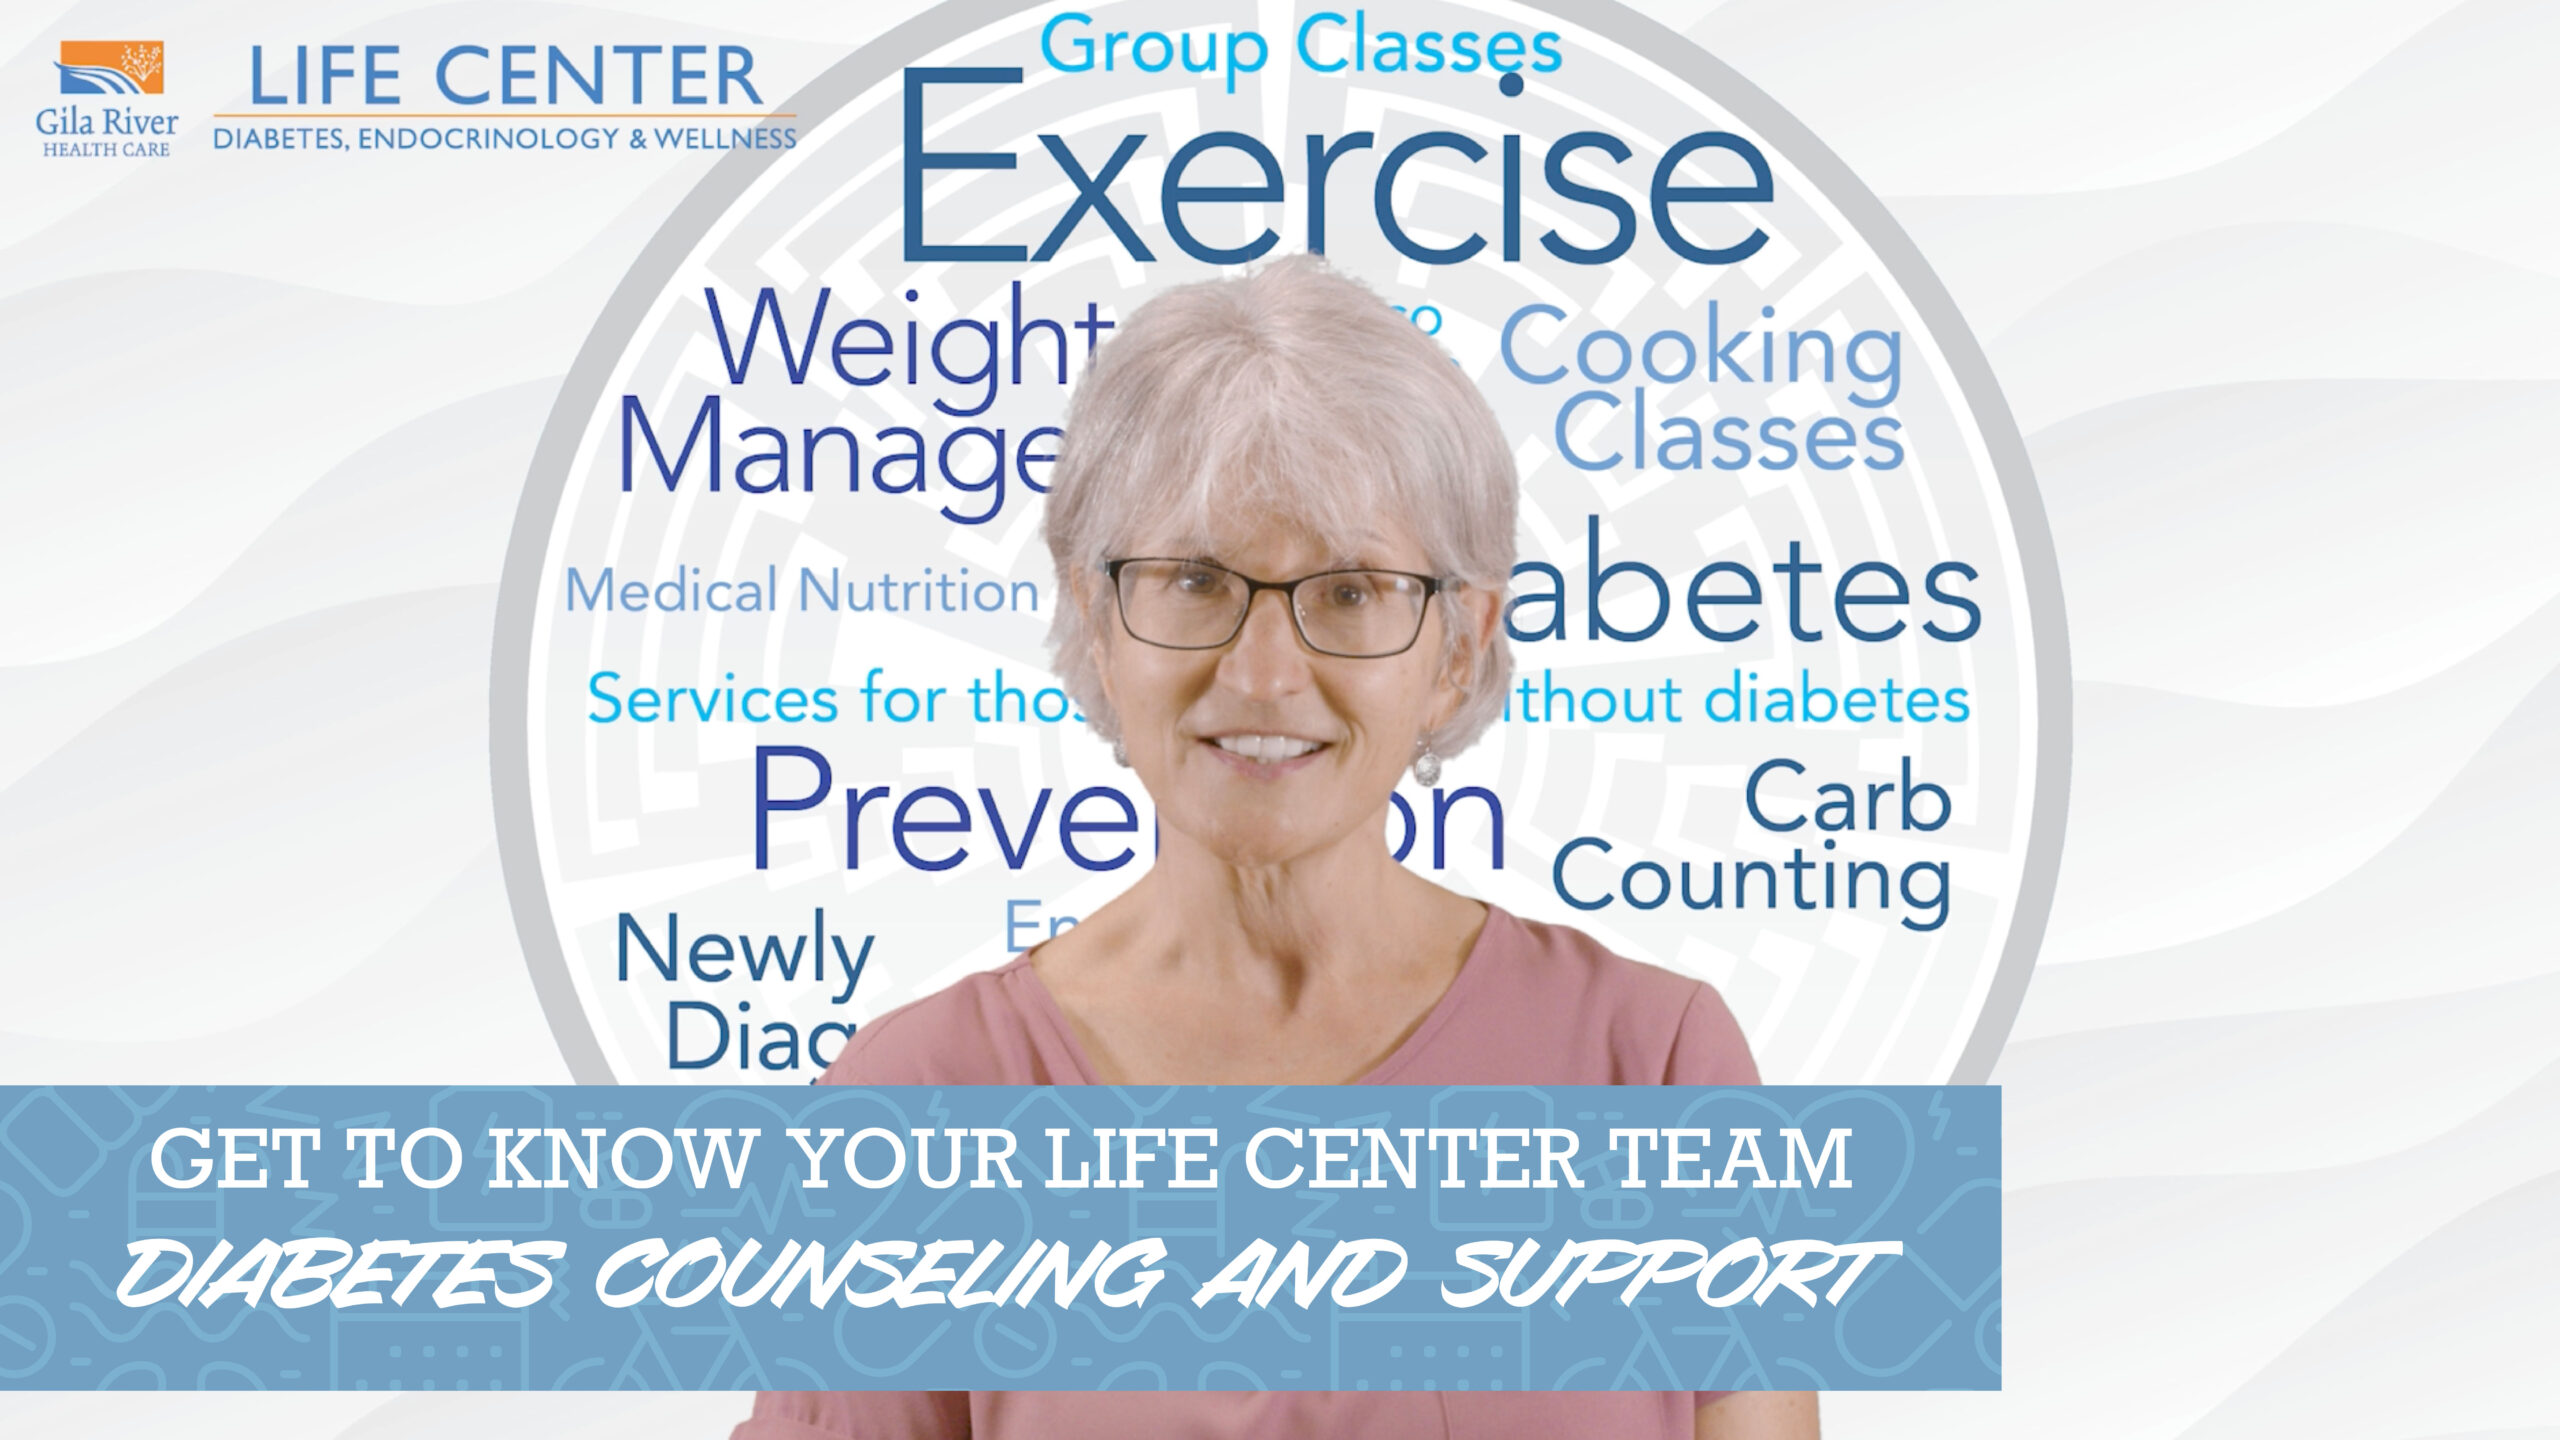 Diabetes Counseling and Support